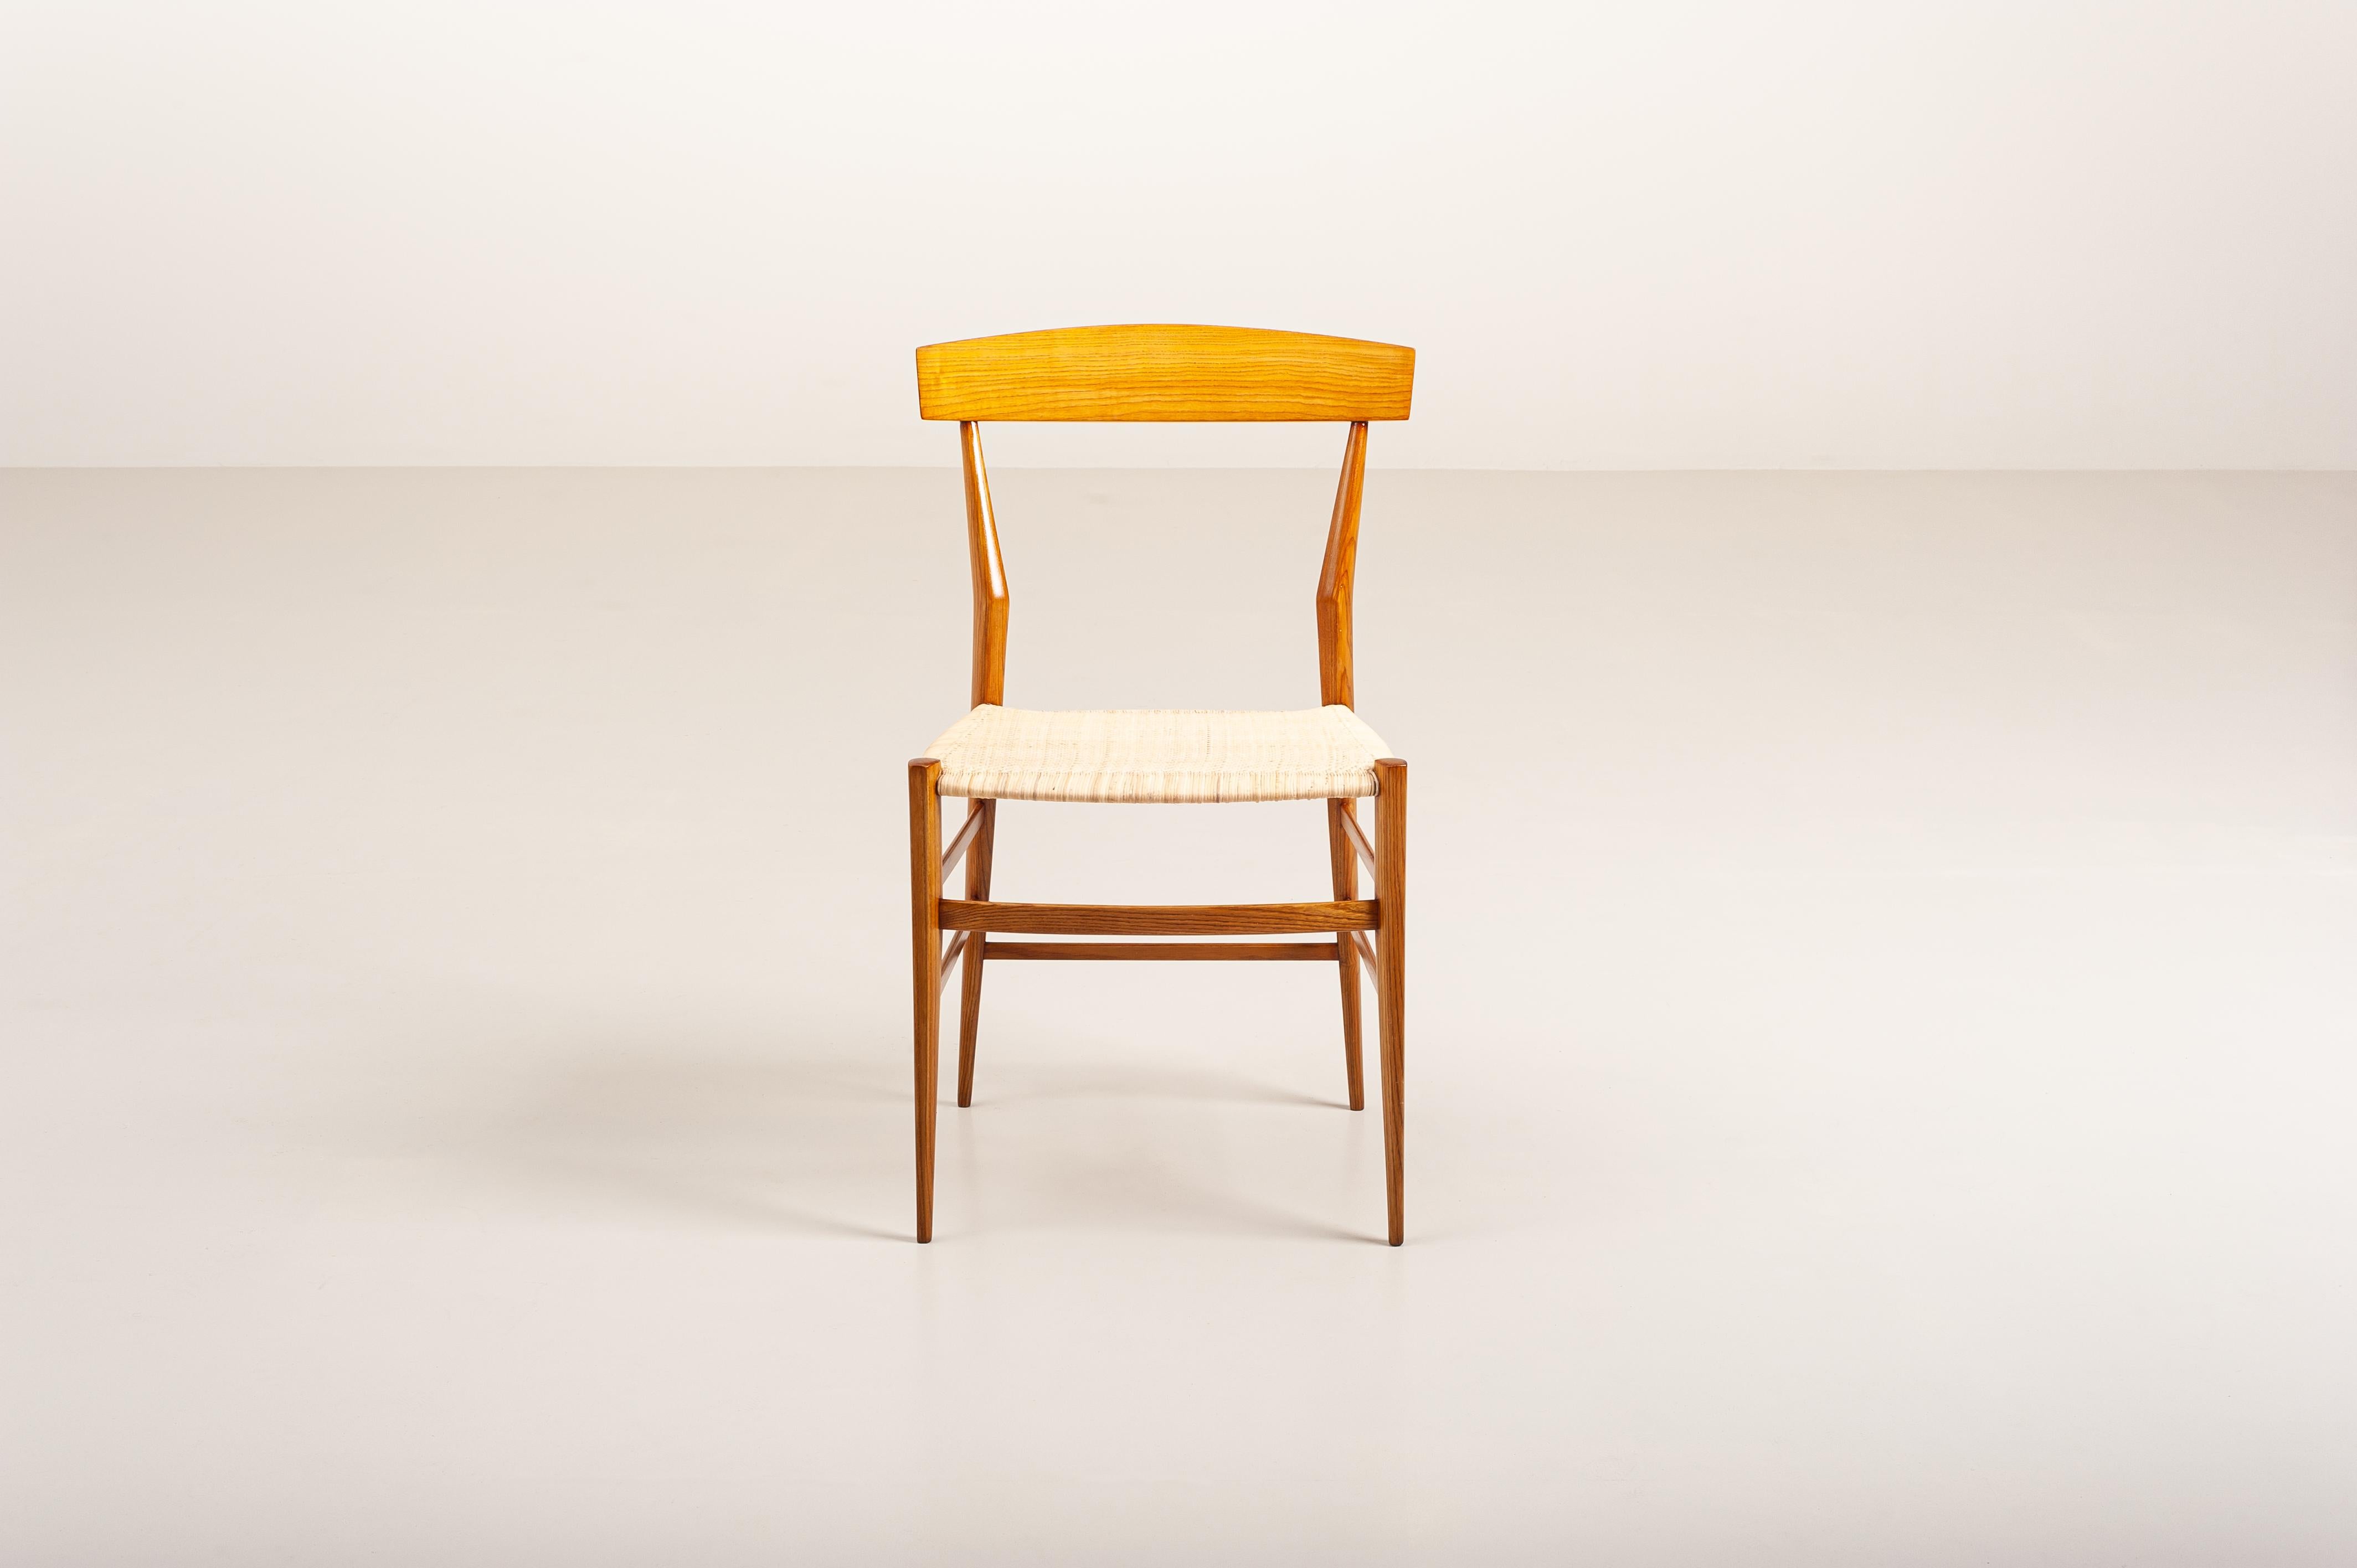 Caning 'Fratelli Podestà', 4 Chairs Model P5 with Drawn Guinea Cane Top, Chiavari 1970s For Sale